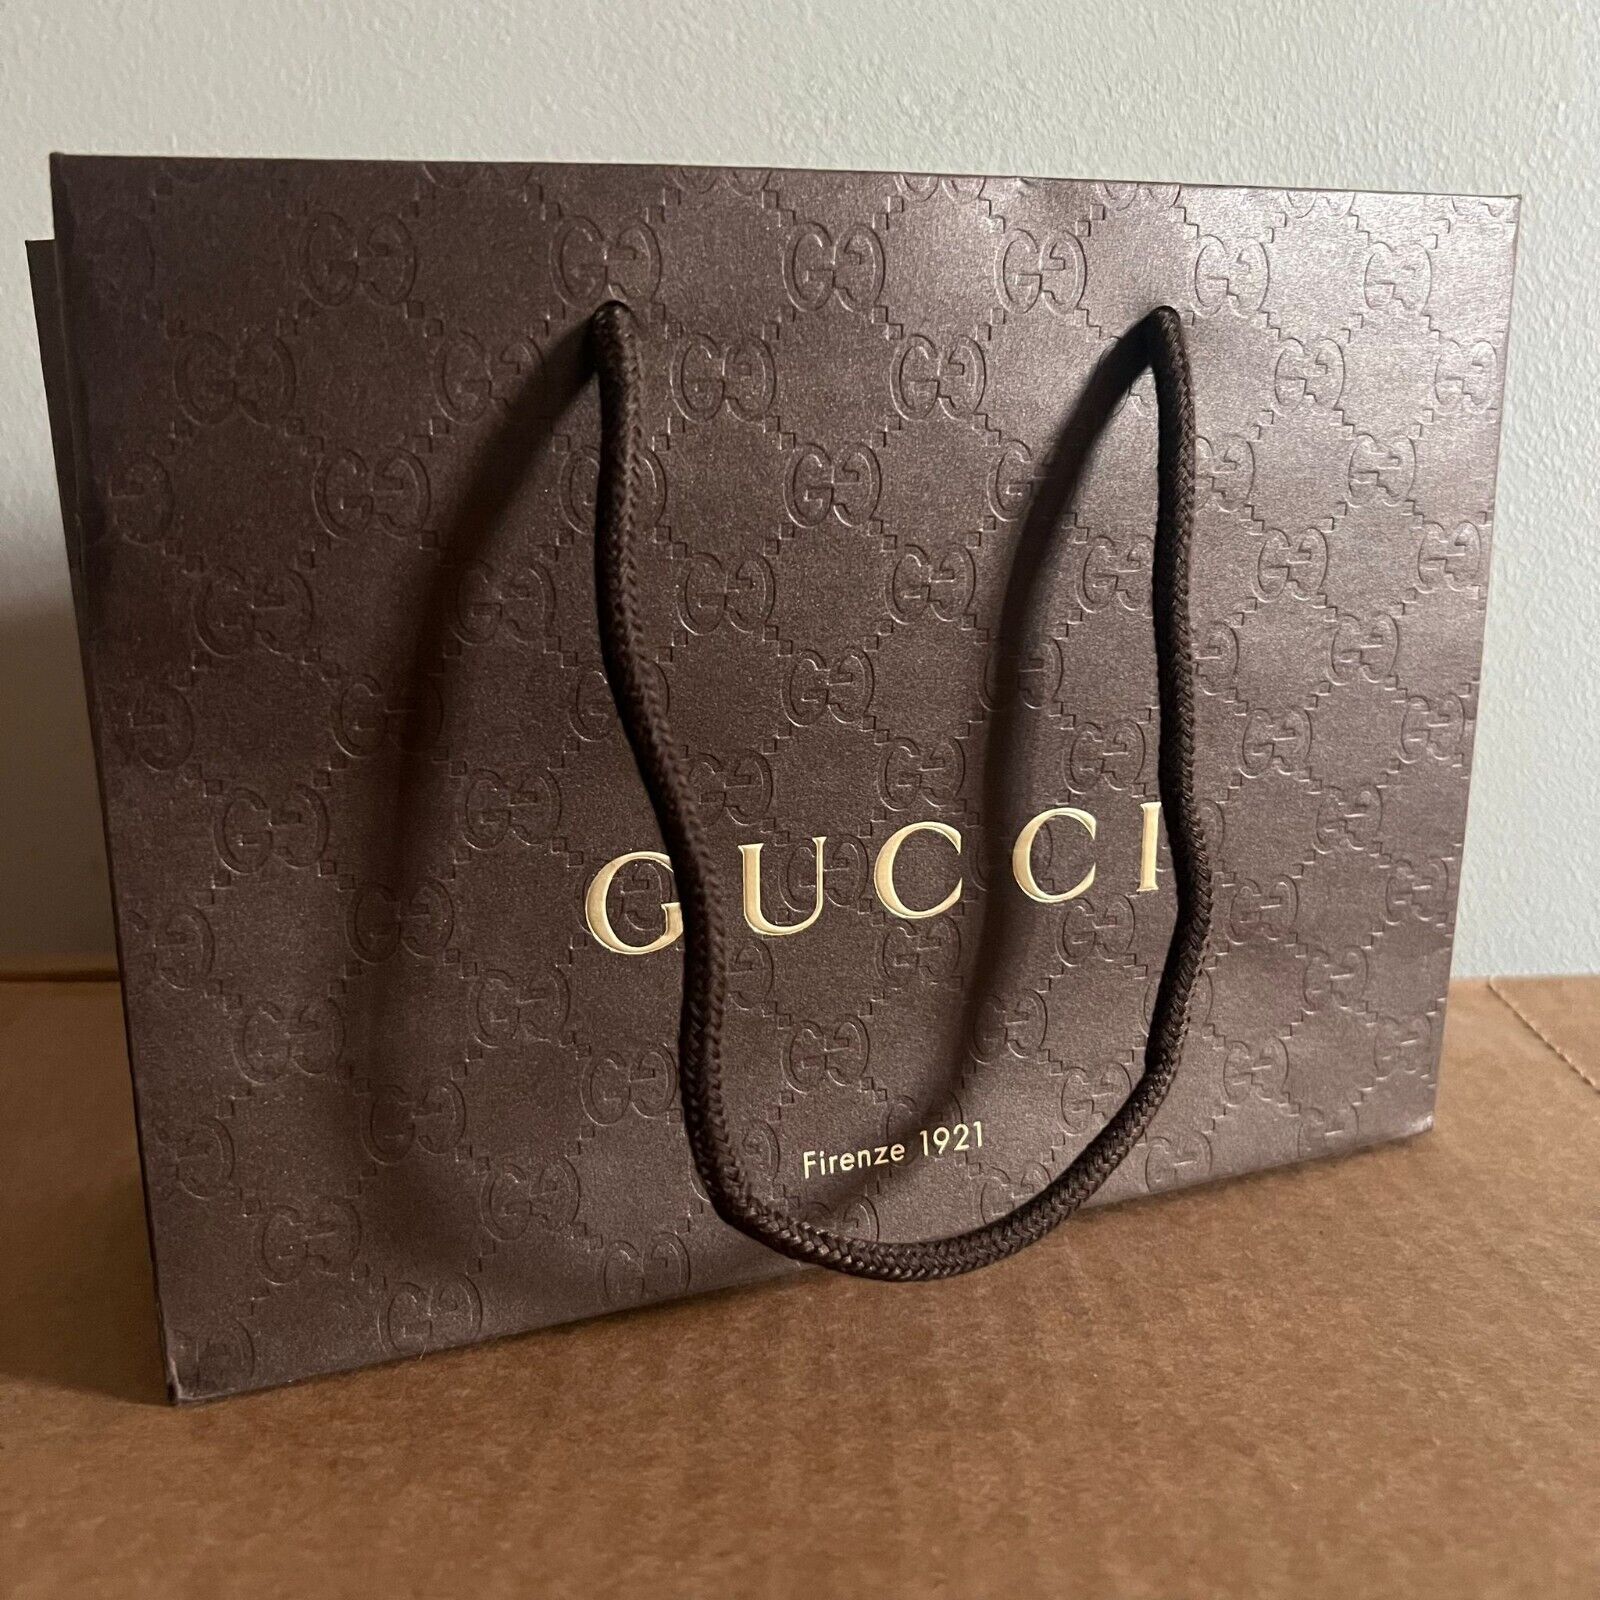  GUCCI FIRENZE 1921 BROWN GUCCI SSIMA PAPER GIFT SHOPPING BAGS  Gucci Does Not Apply